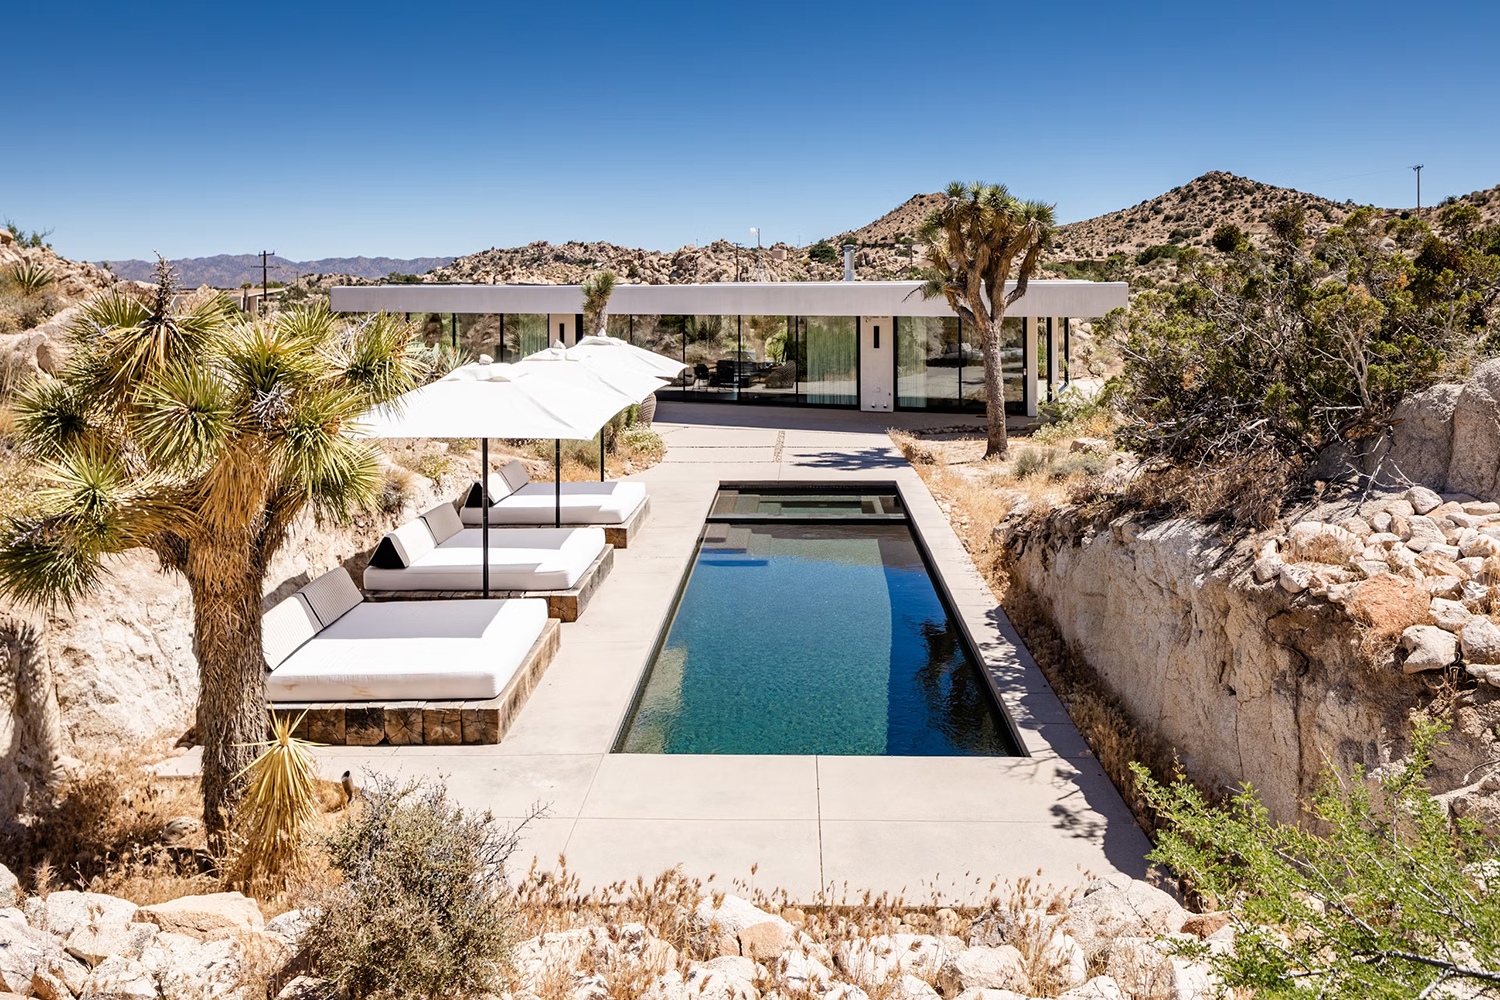 View of the pool and lounge area at Desert Skies vacation home rental near Joshua Tree National Park, California.